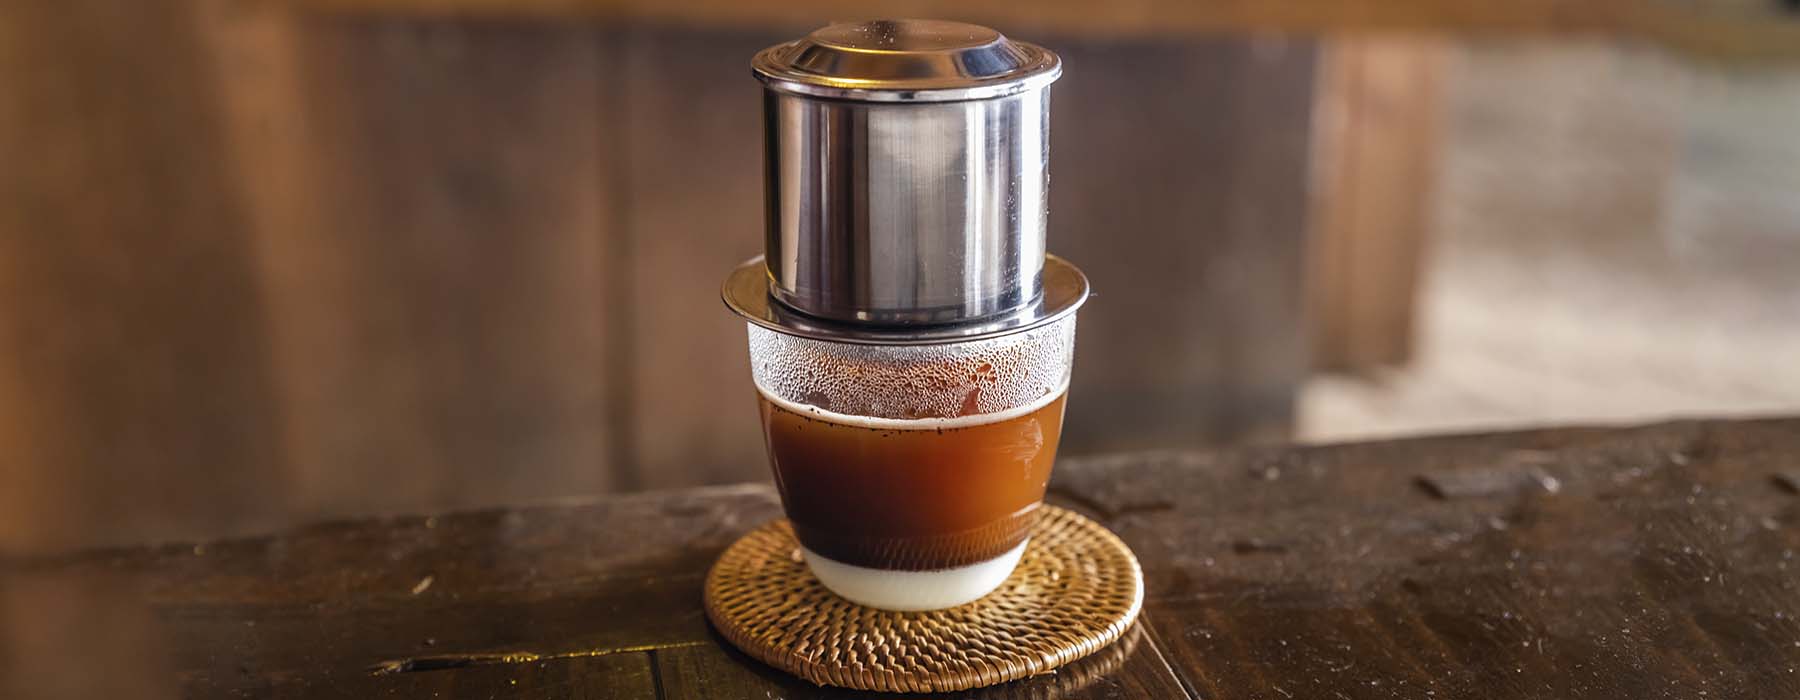 EspressoWorks Blog - 8 Sugar Alternatives for Coffee You Didn’t Know Existed - Vietnamese Coffee